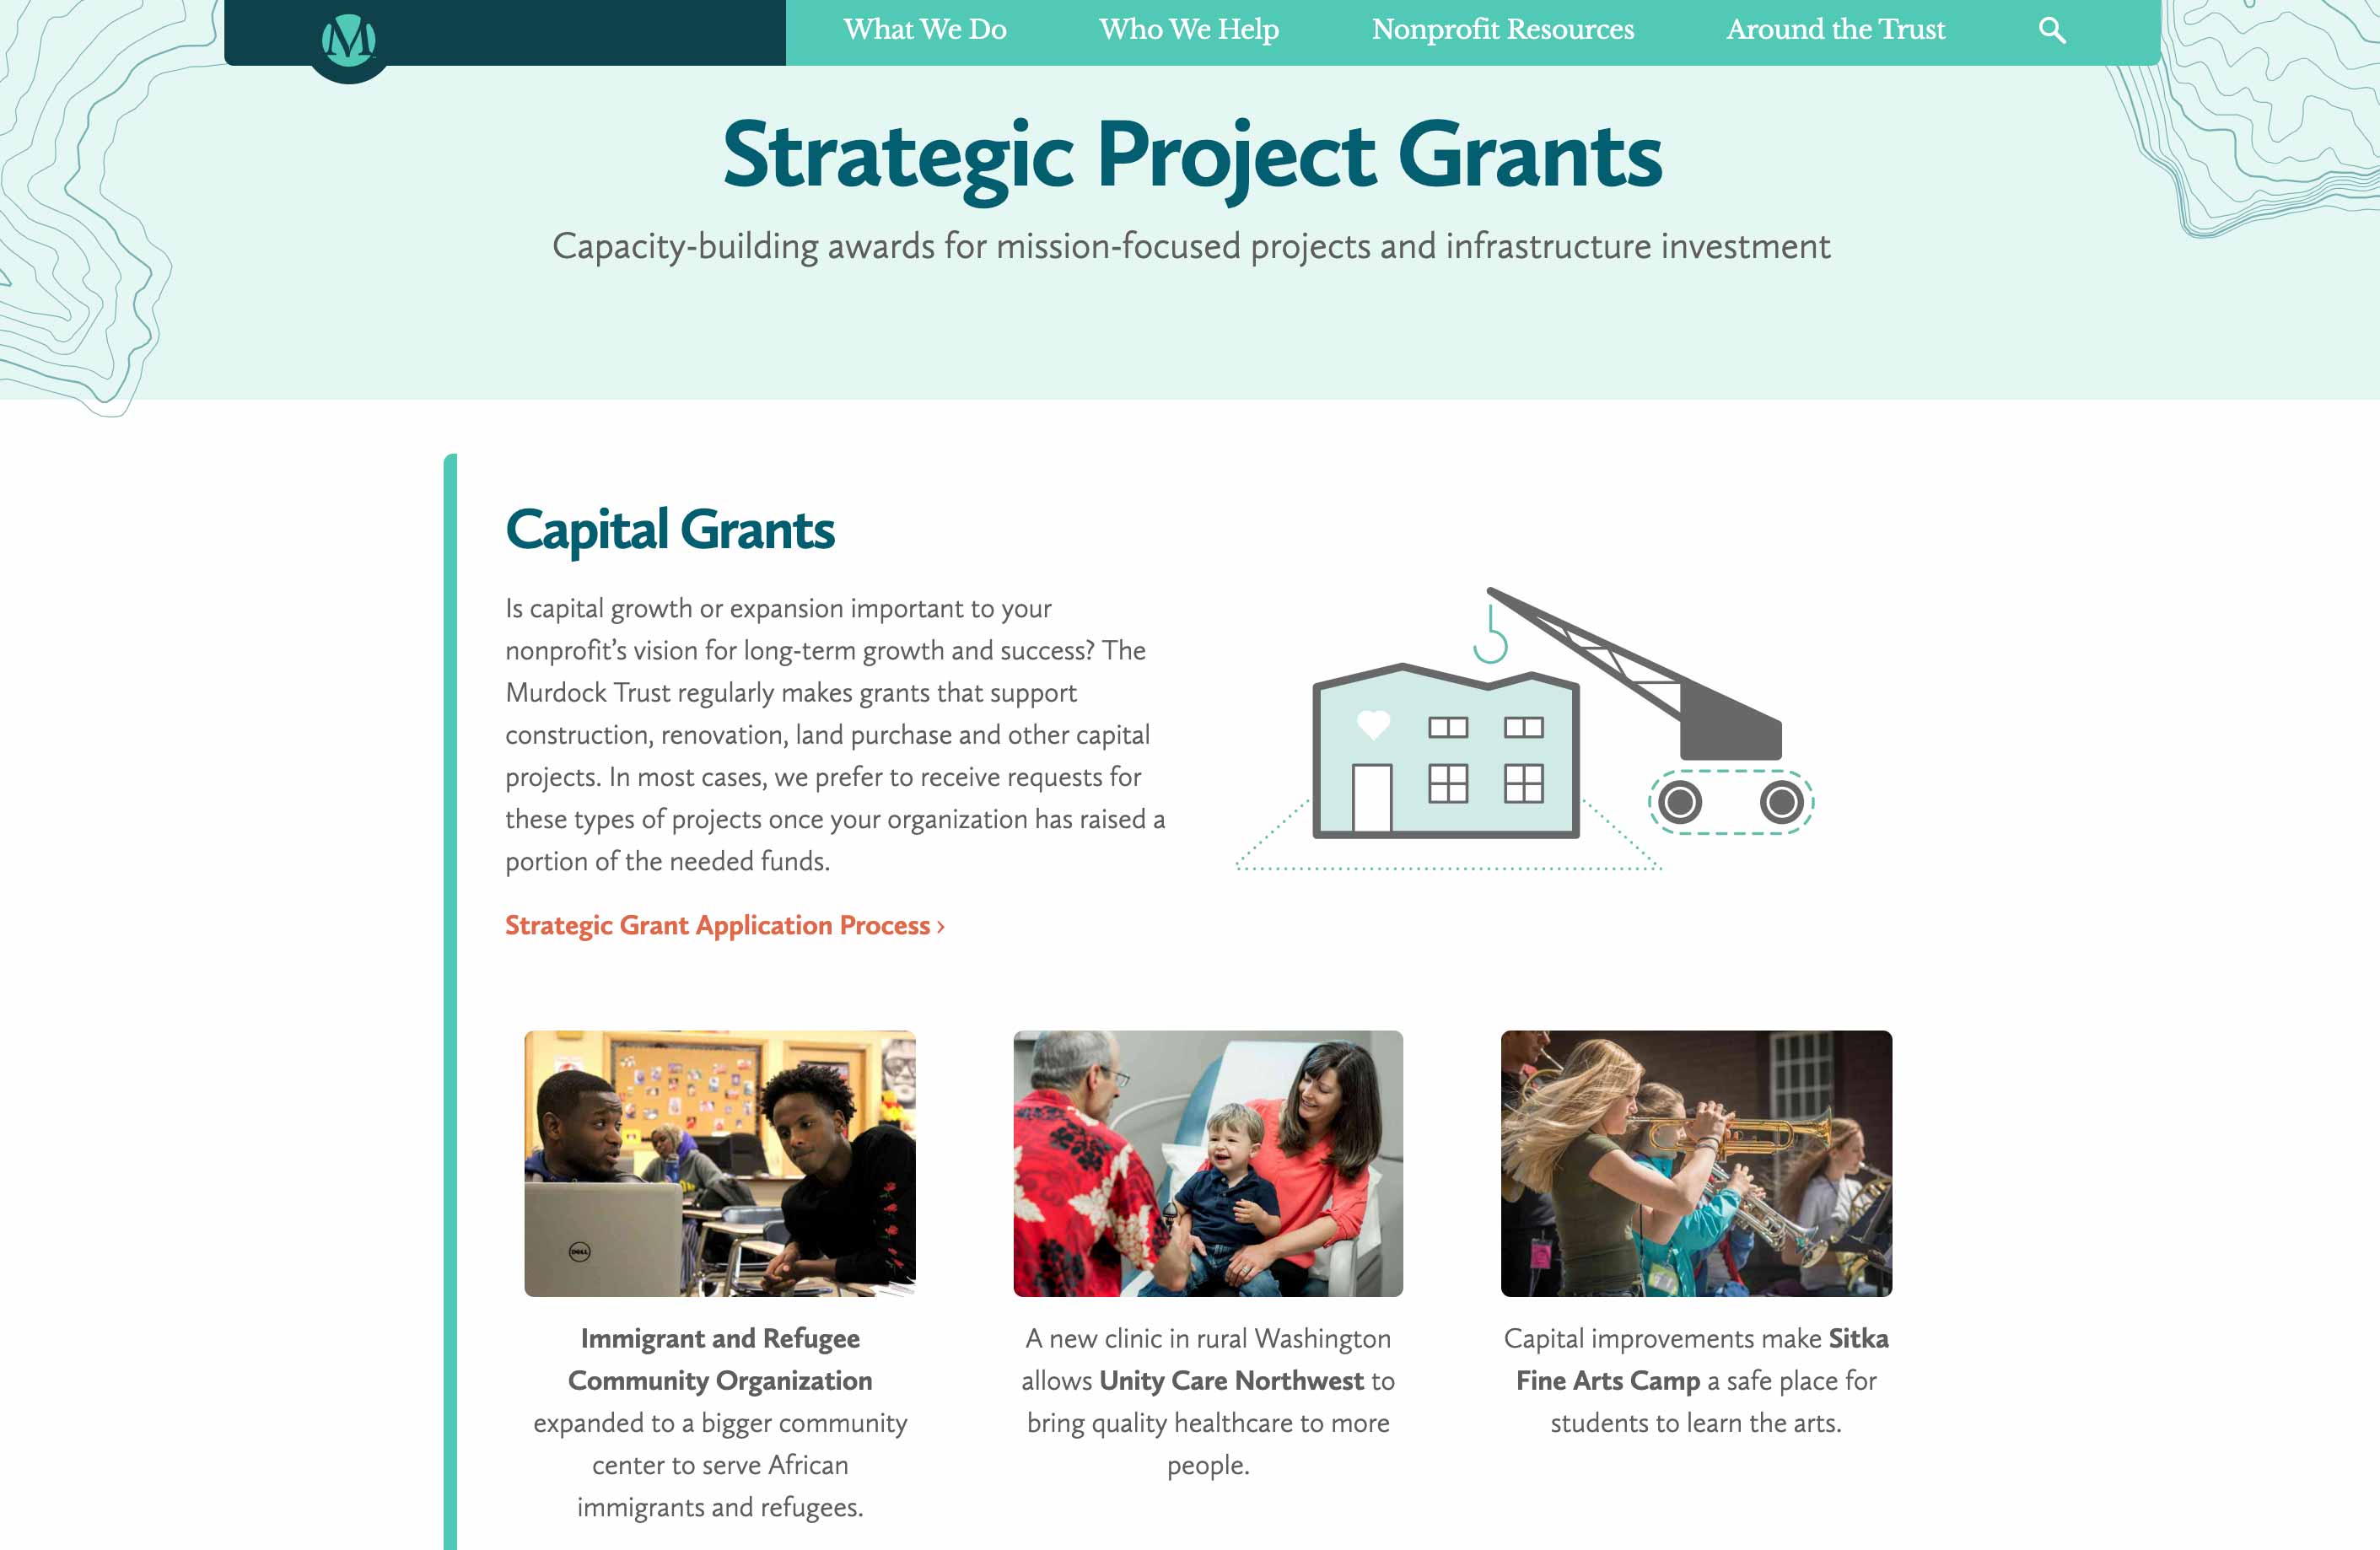 A screenshot of the M.J. Murdock Charitable Trust website with a header that says "Strategic Project Grants" above information on Capital Grants. 